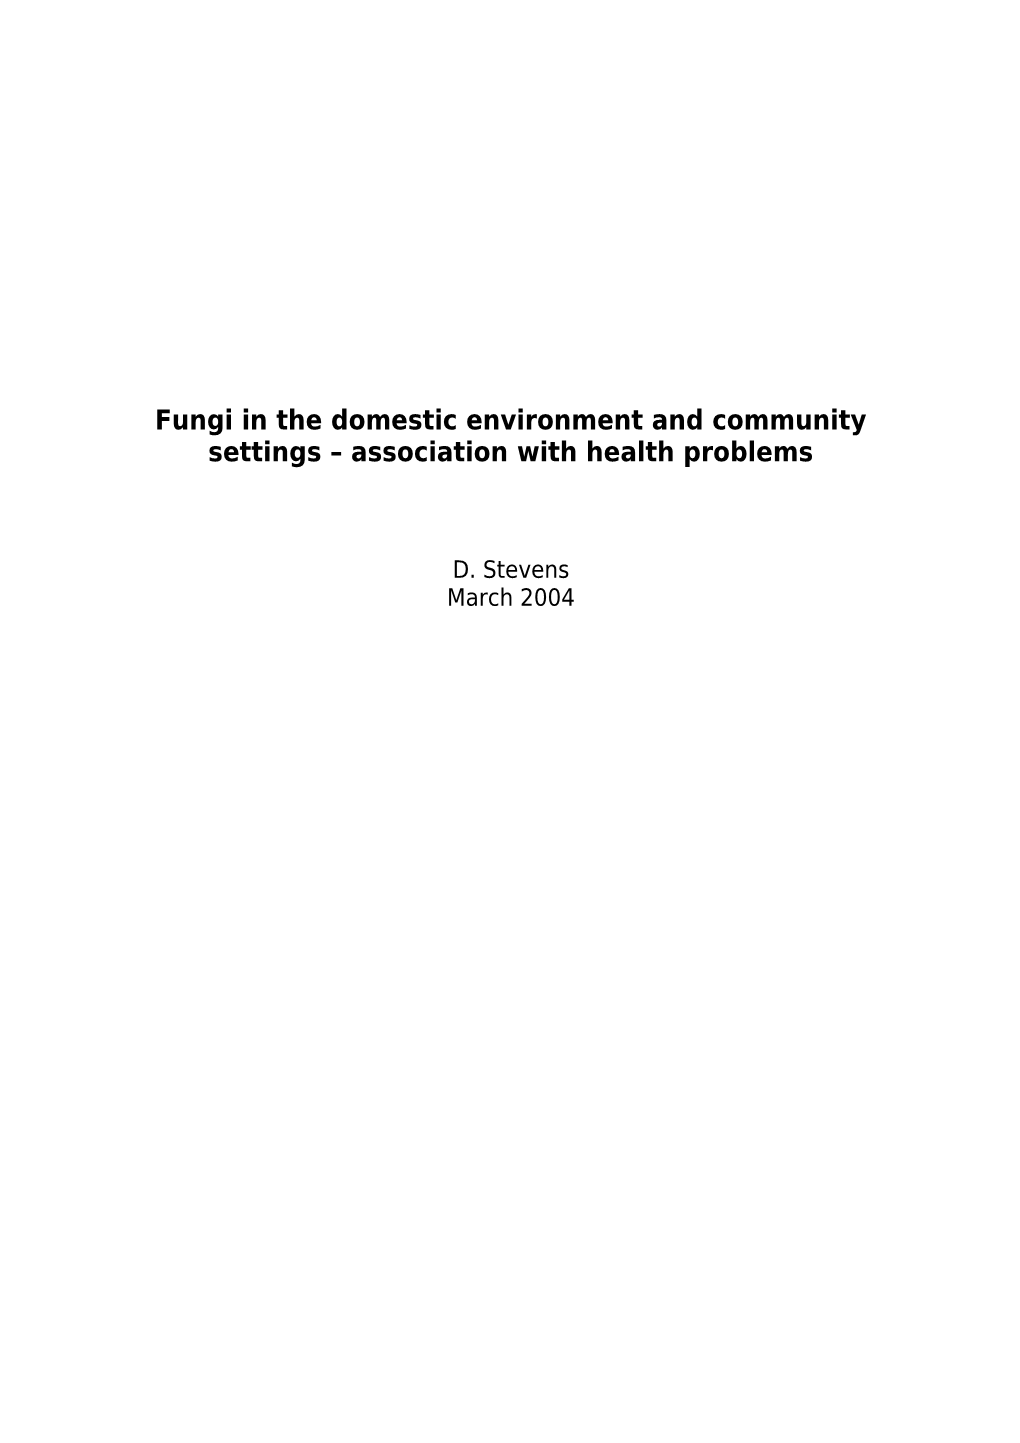 Fungi in the Domestic Environment and Community Settings Association with Health Problems